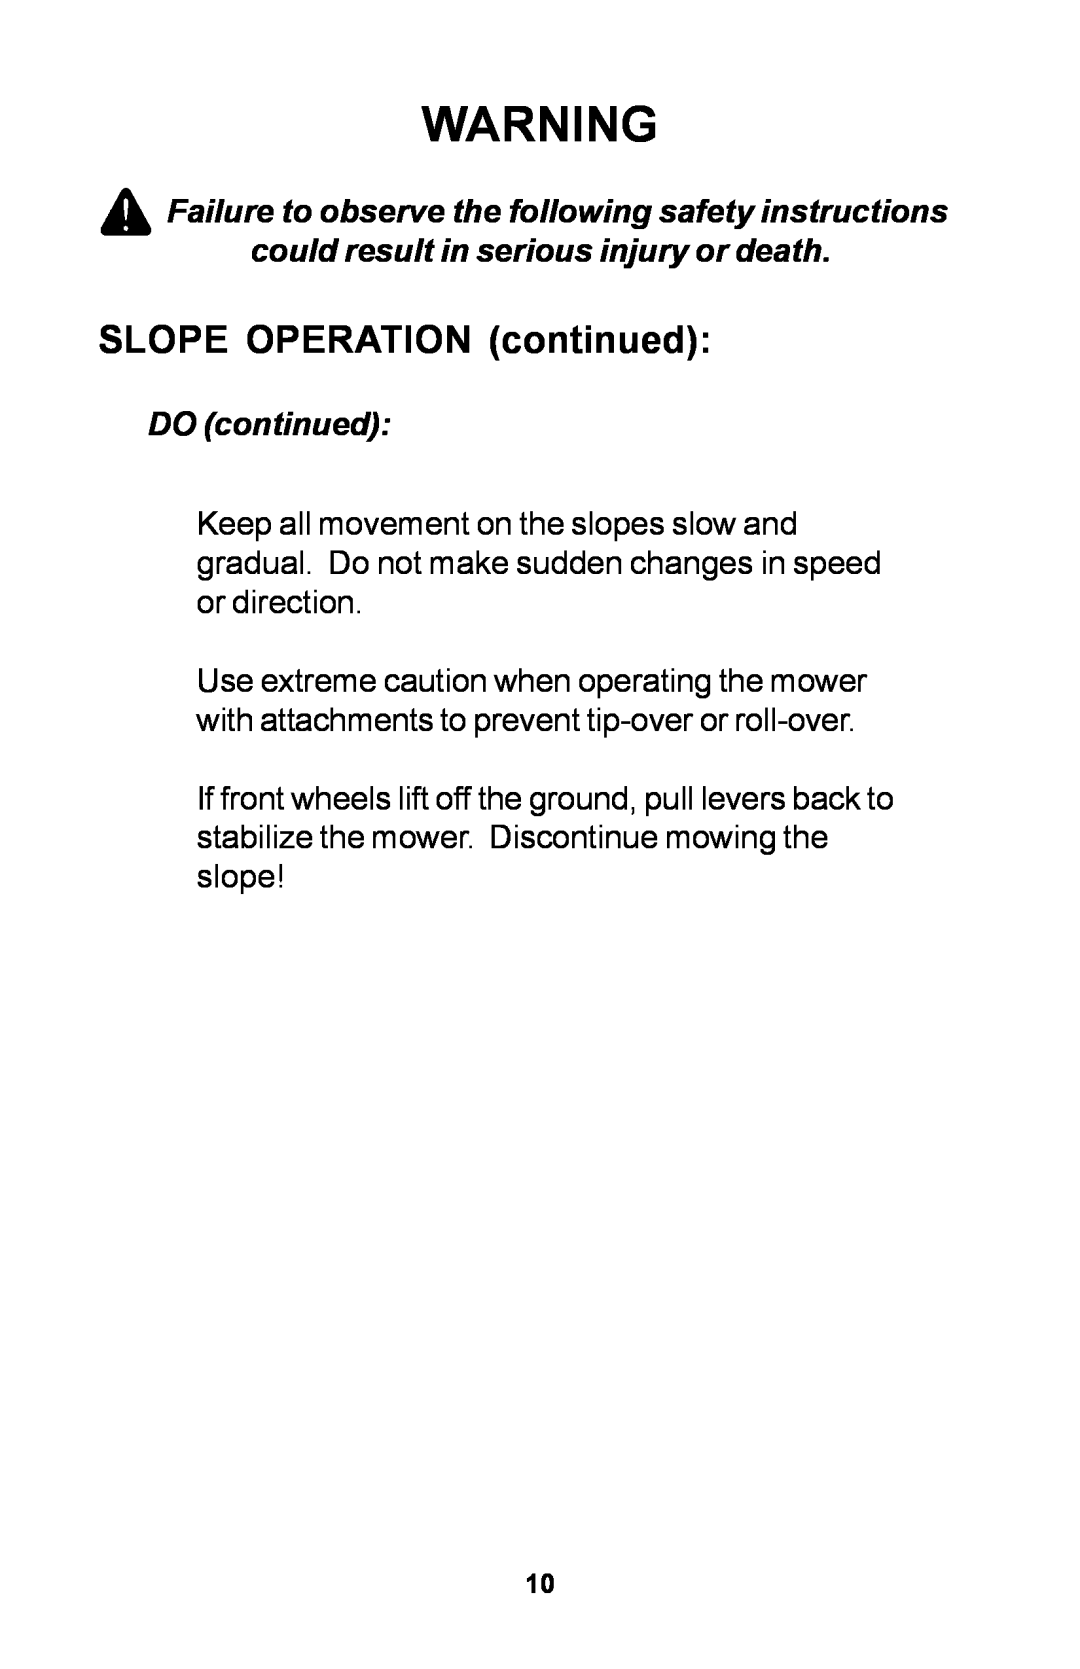 Dixon 30 manual SLOPE OPERATION continued, DO continued 